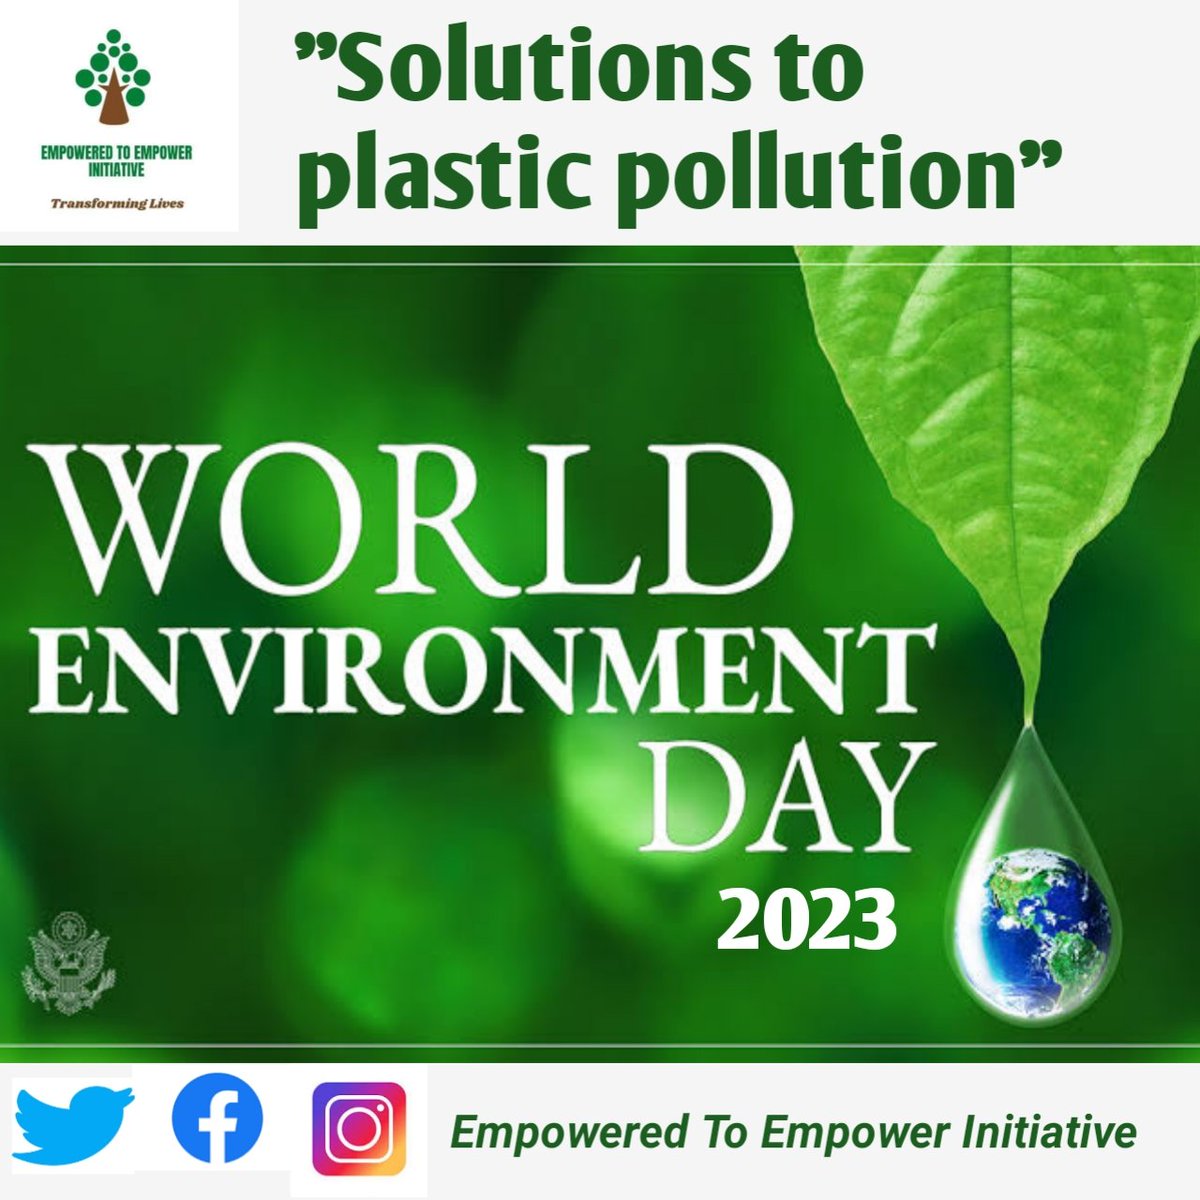 A happy World Environment Day 2023!

 50 years of celebrating this day. It was first launched on June 5, 1973 during the Stockholm conference on Human Environment. 

The theme of the day: Solutions to plastic pollution.

#beatplasticpollution
#WED2023
#environmentalmanagement